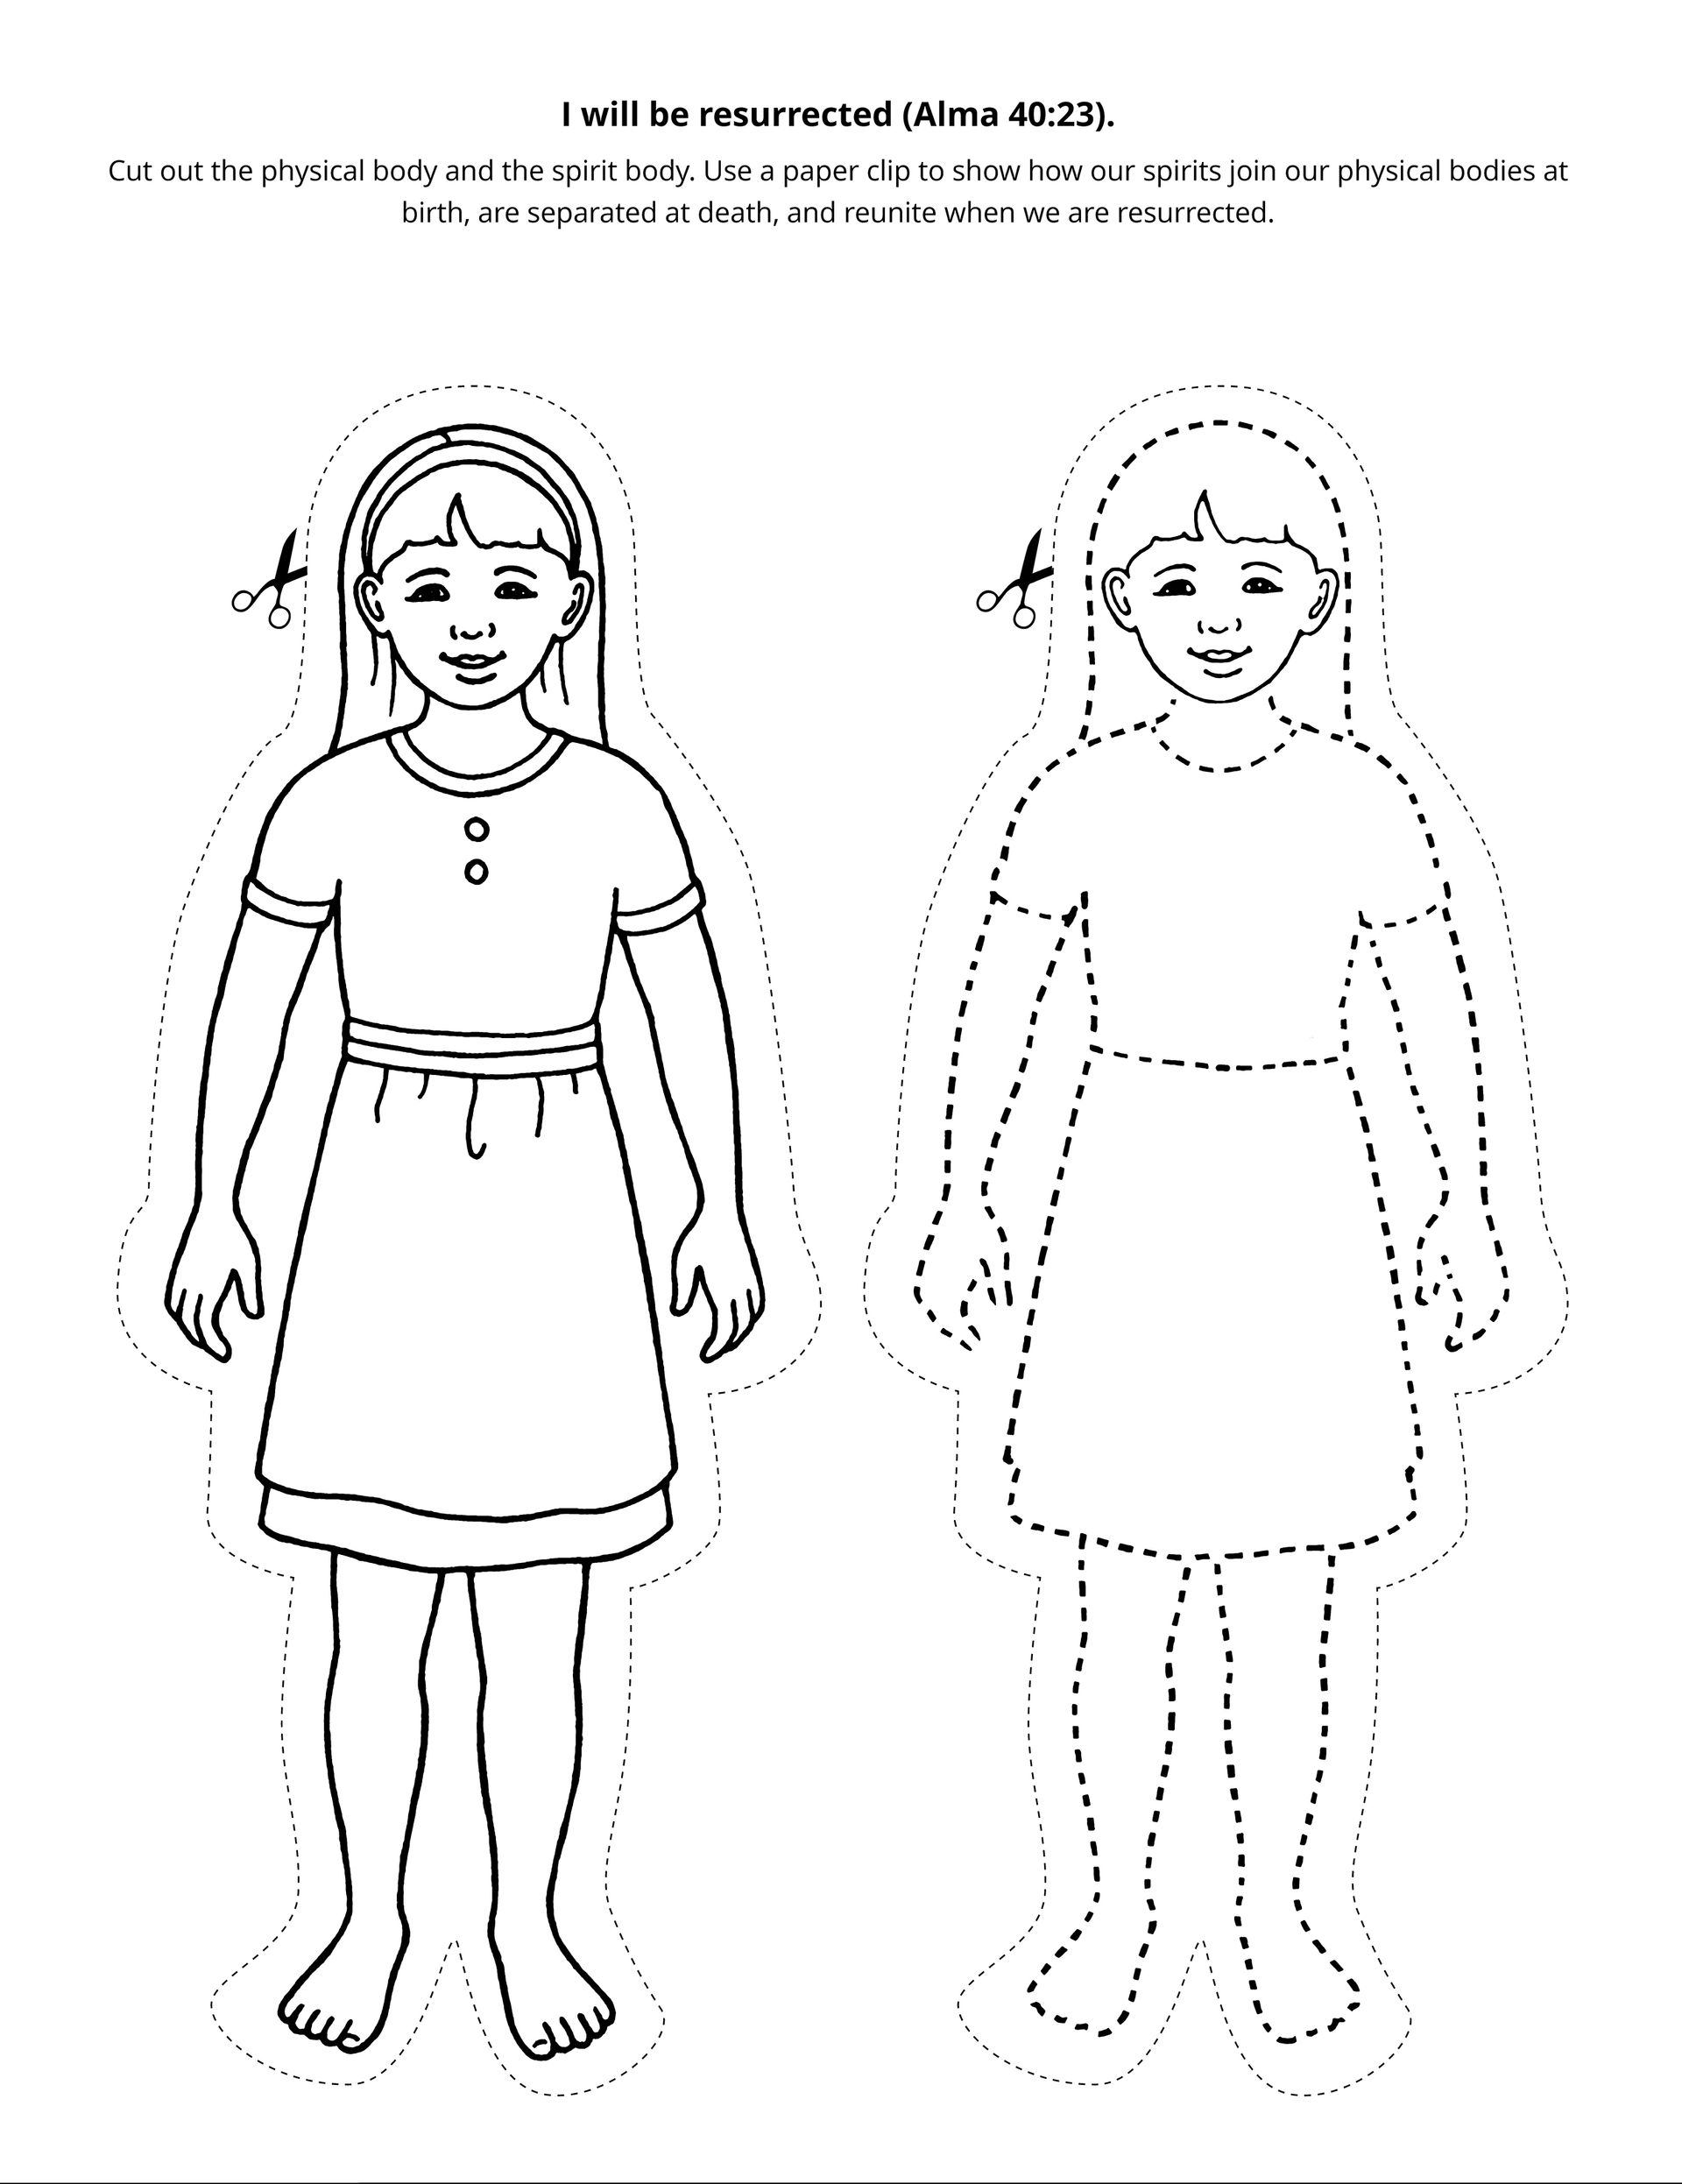 A line-art drawing of a girl with a physical body and a spirit.